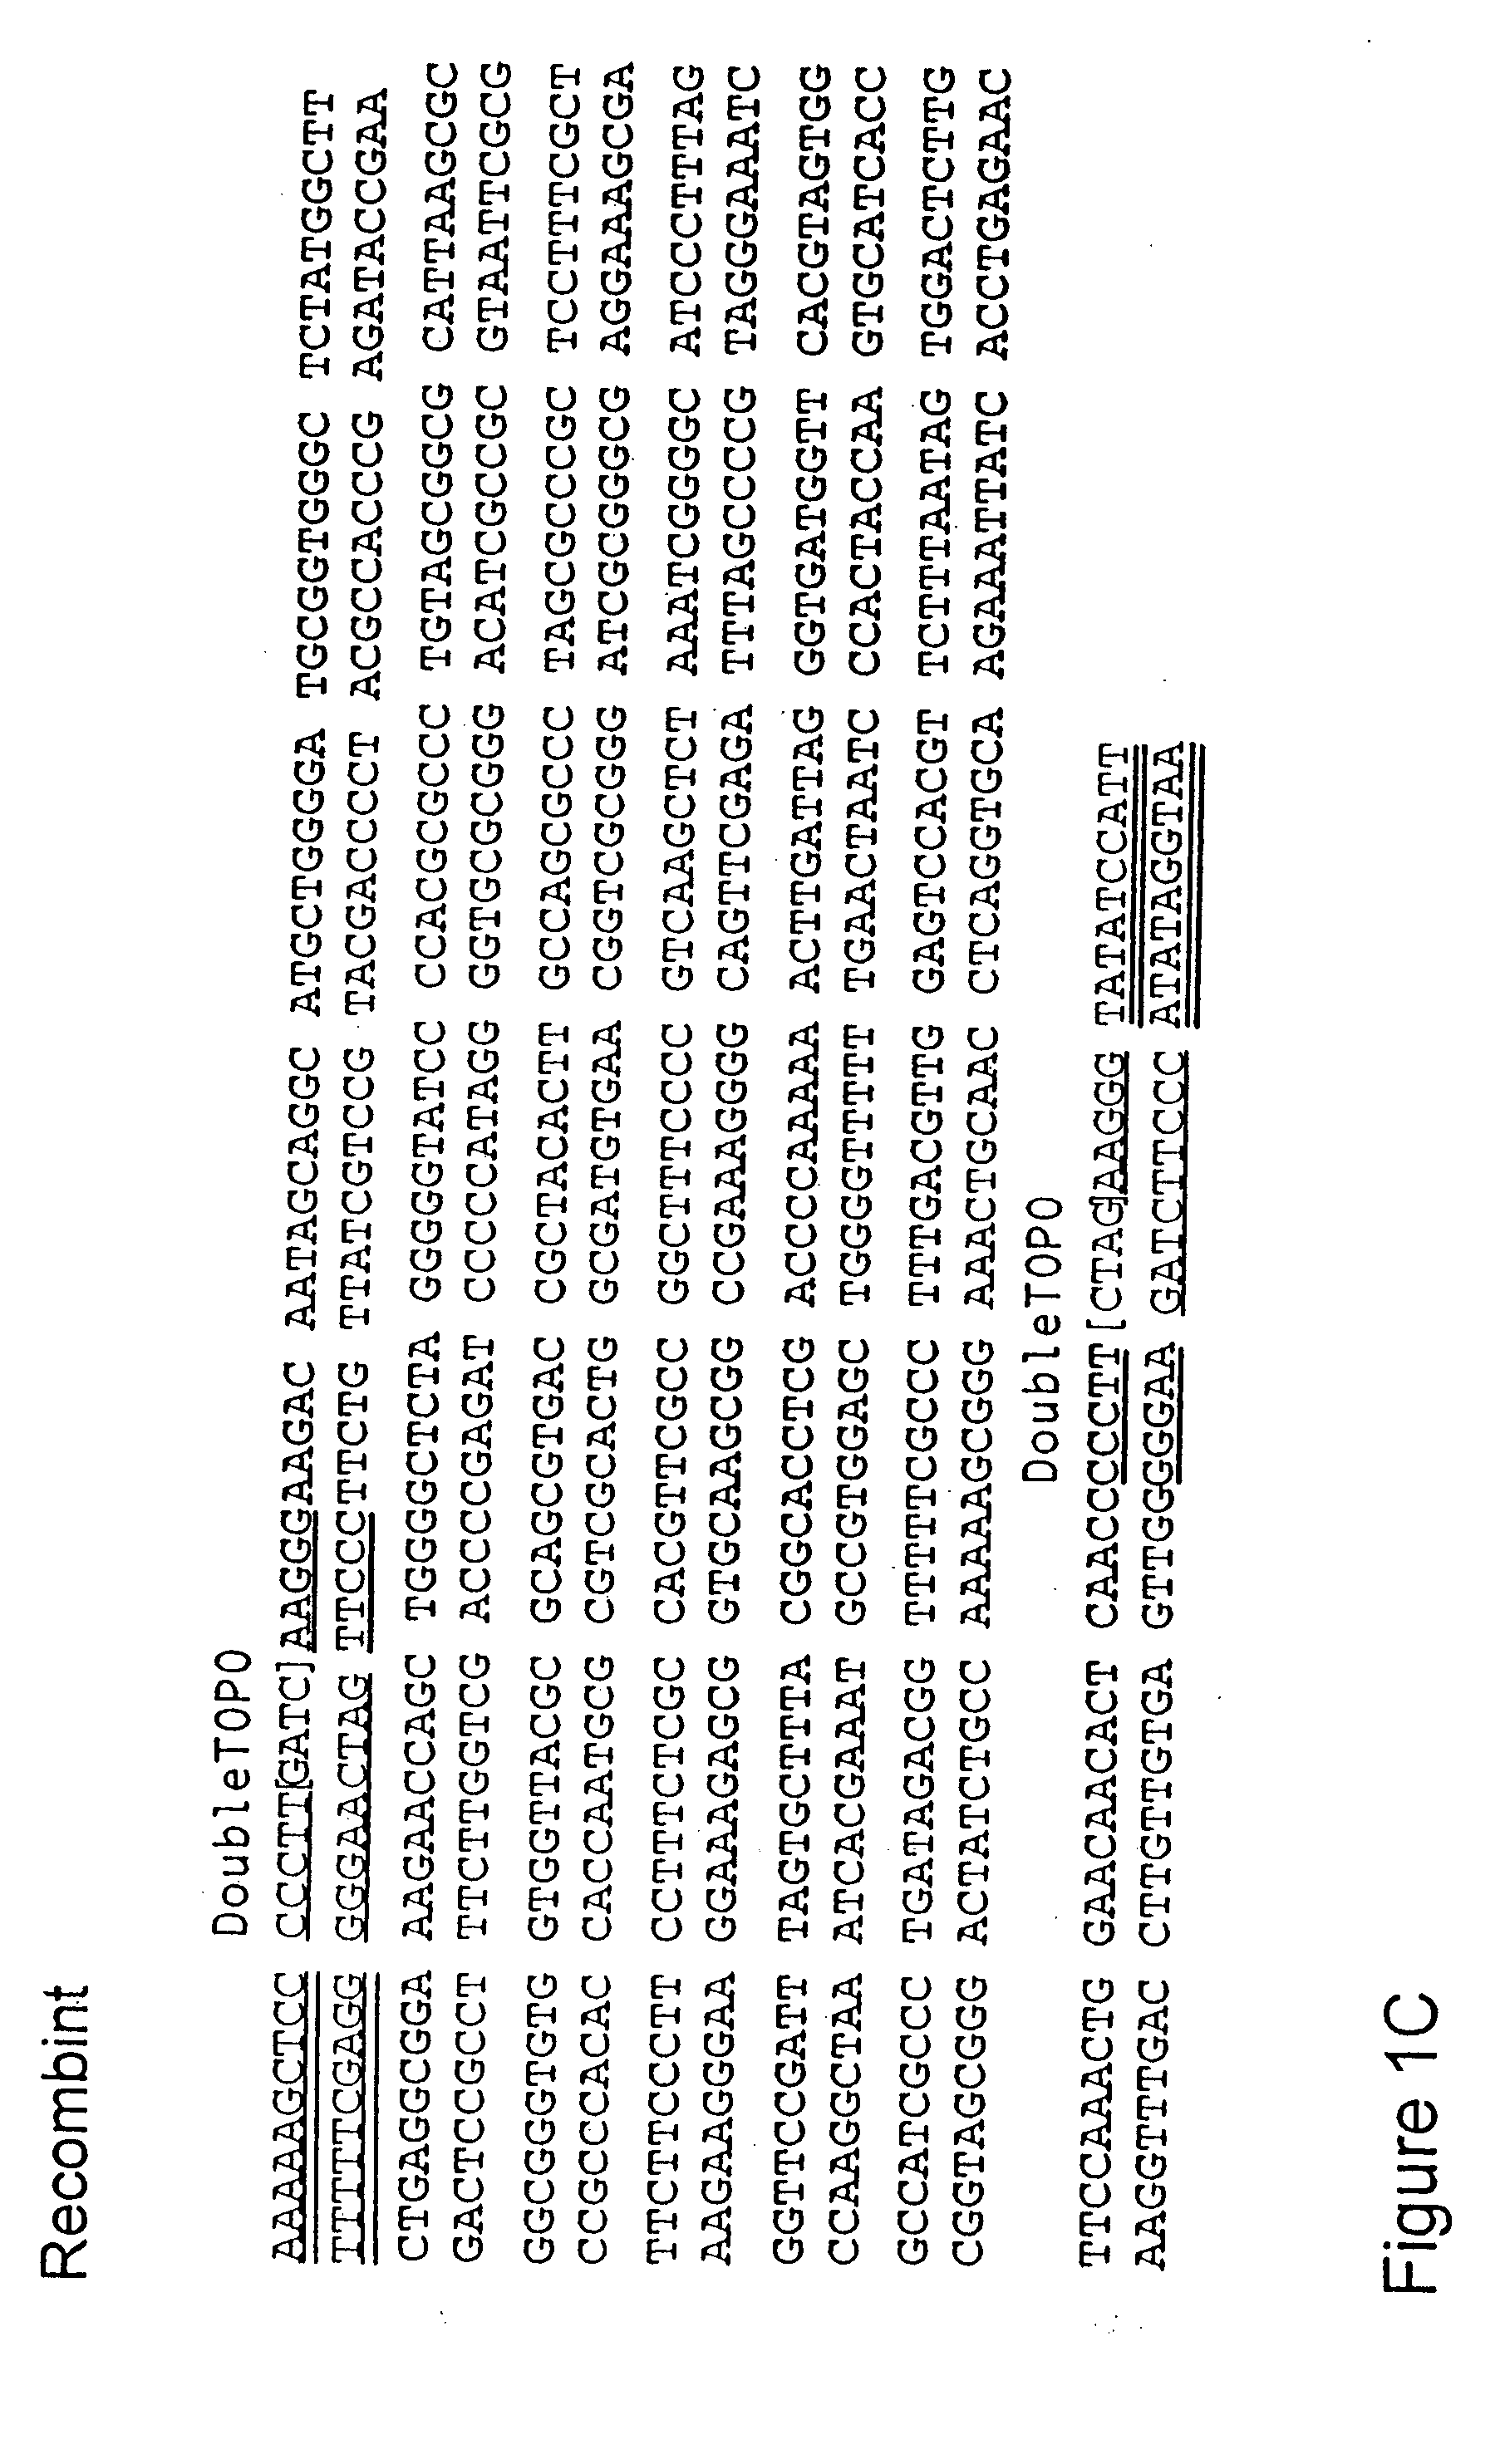 System for the rapid manipulation of nucleic acid sequenaces